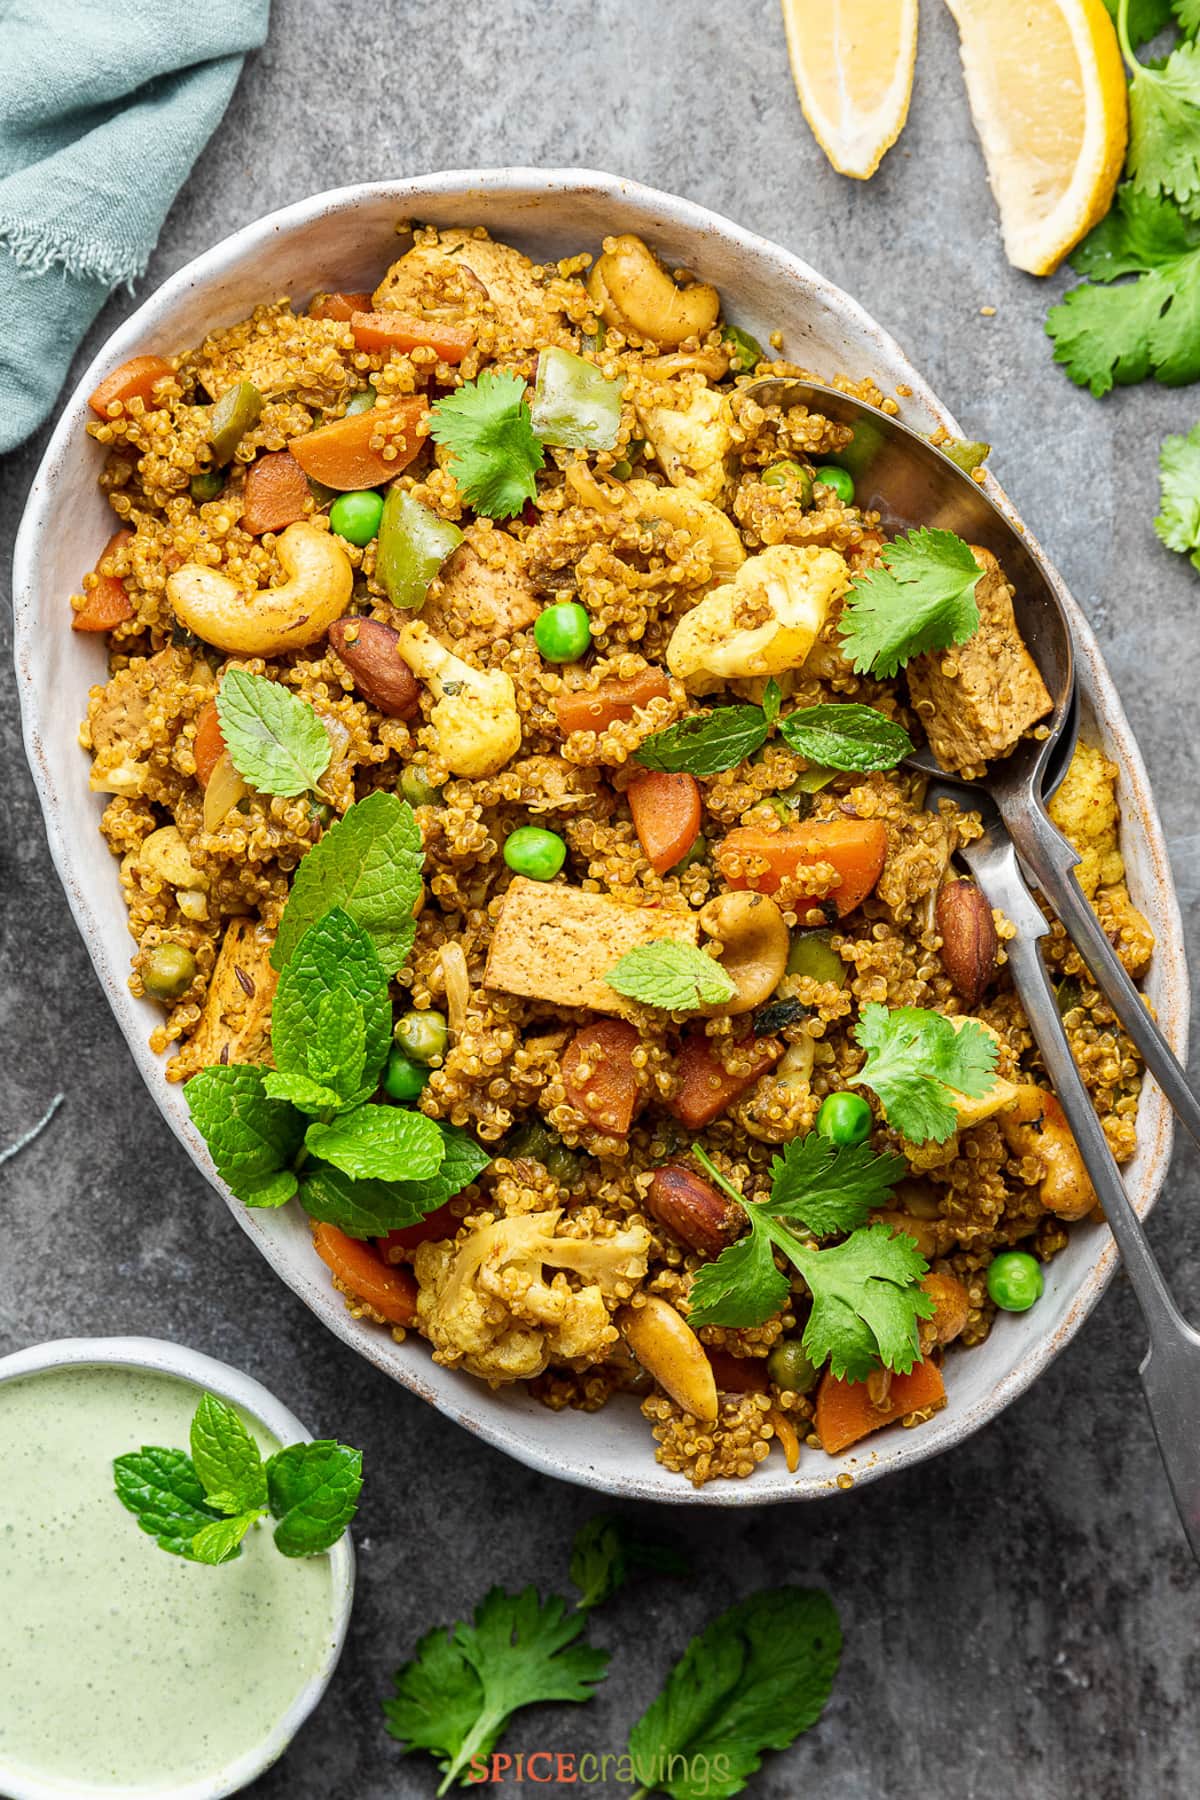 Quinoa and vegetable pilaf in white oval dish, garnished with herbs